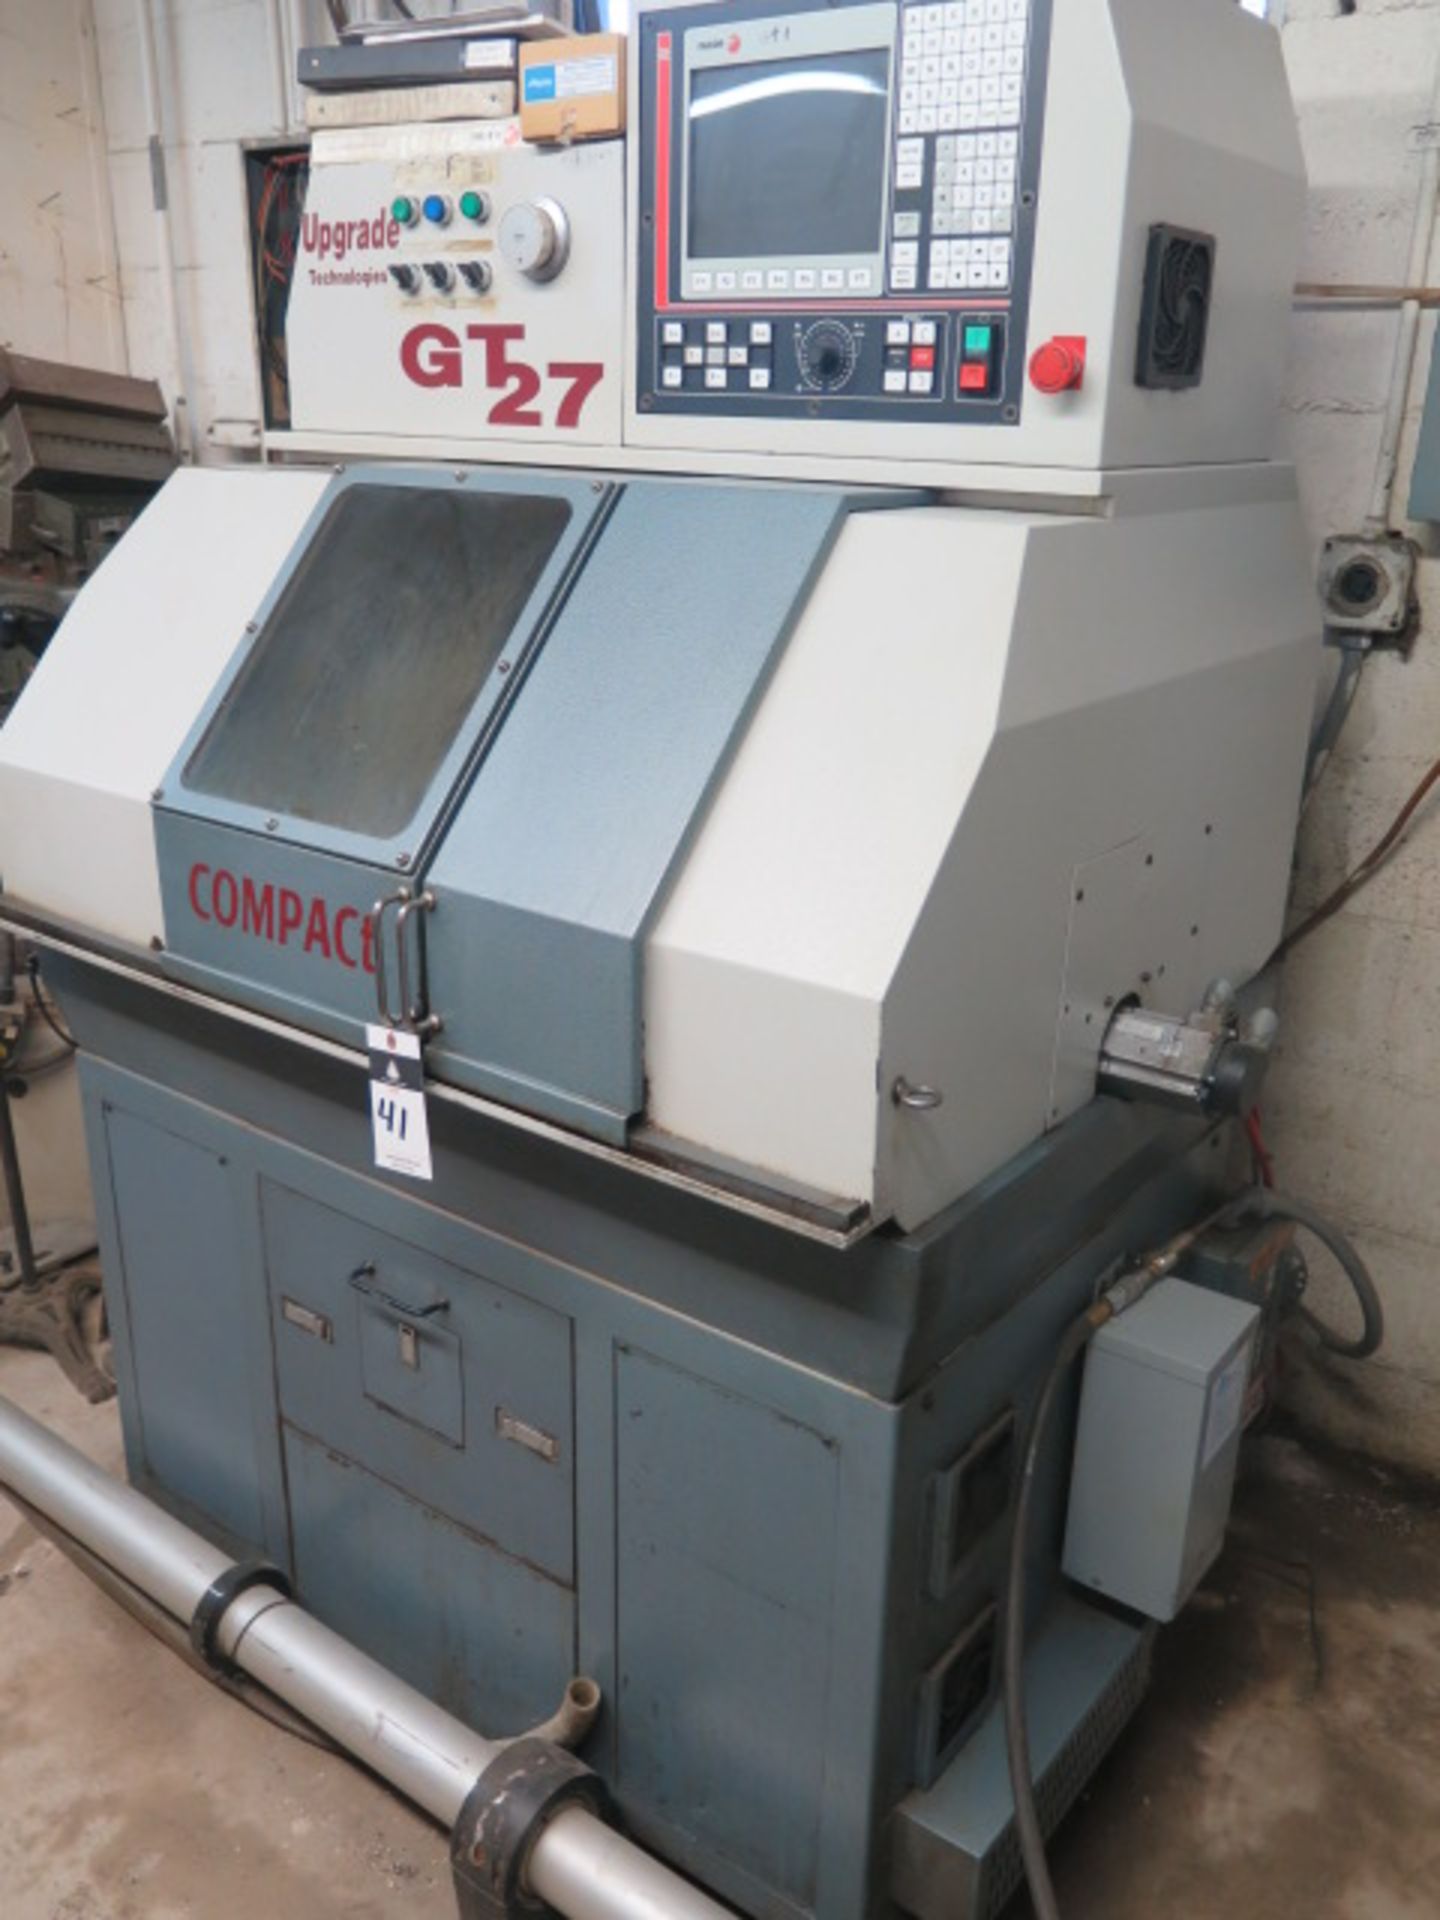 Upgrade Technologies “Compact GT27” CNC Cross Slide Lathe s/n DC572053E w/ Upgraded 8” Fagor - Image 3 of 13